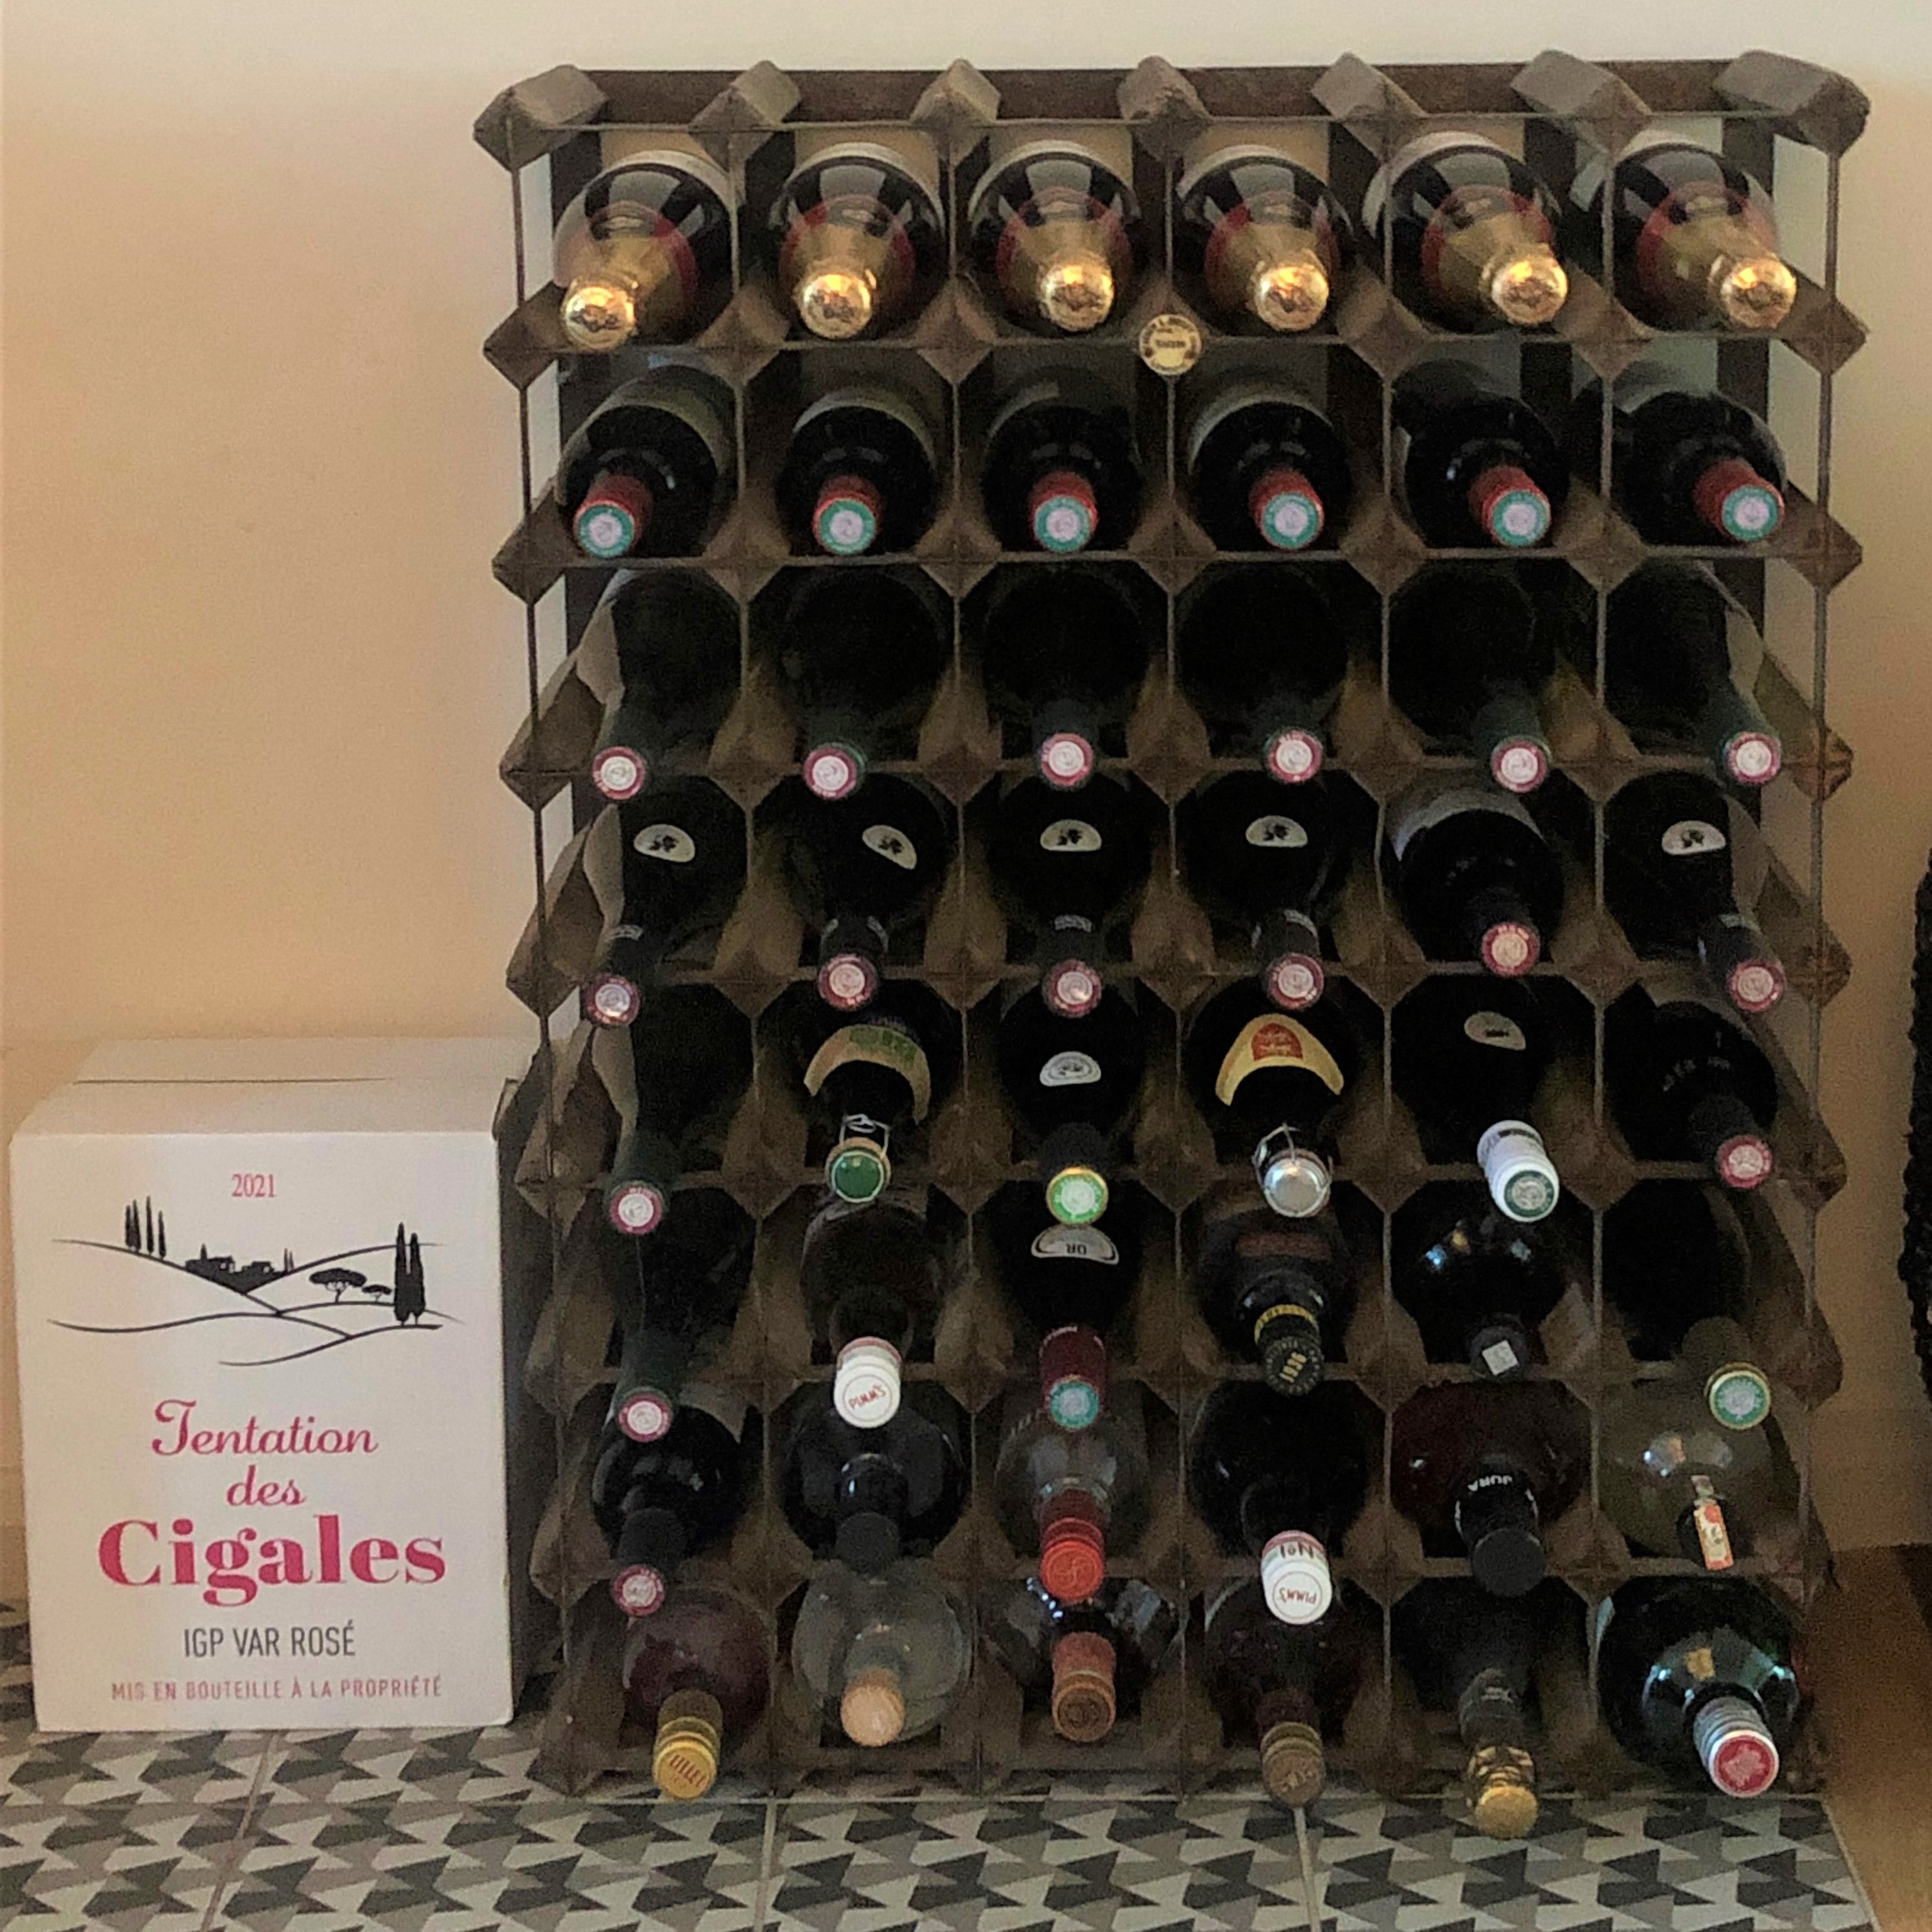 Chris’s proudly replenished wine rack